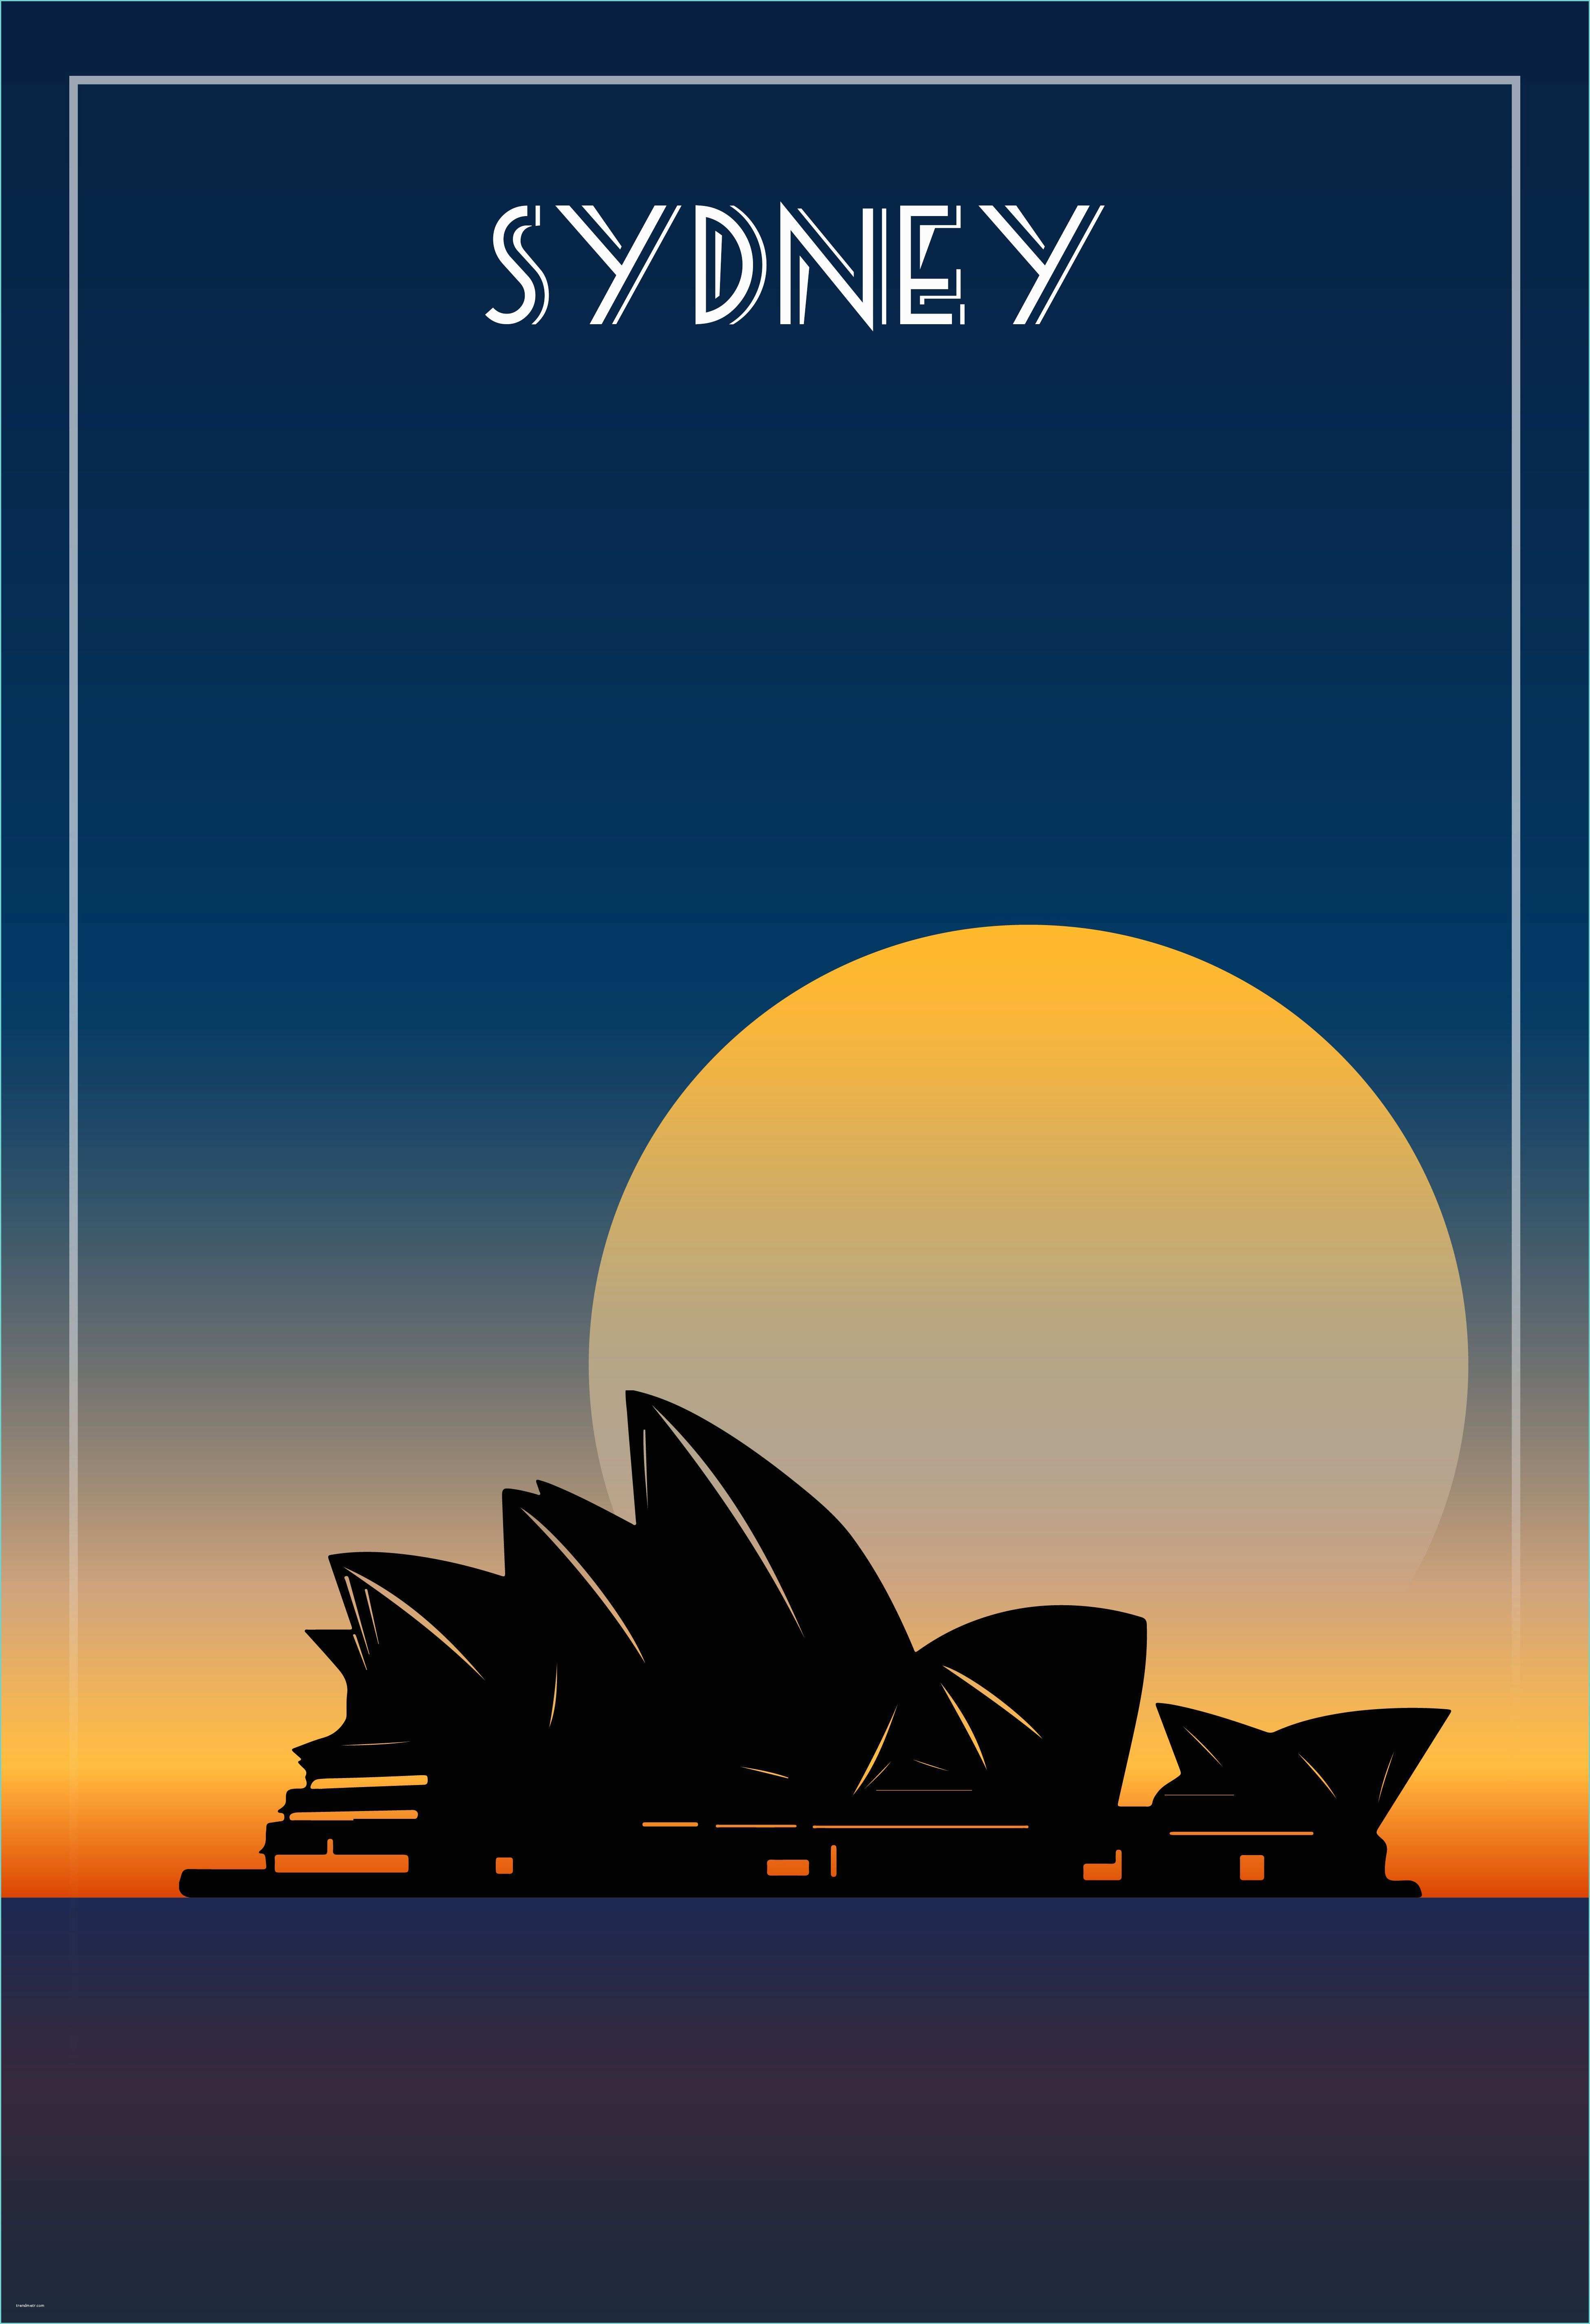 Allposters Return Policy Poster Design Inspired On Sunrise Opera House Sydney Using